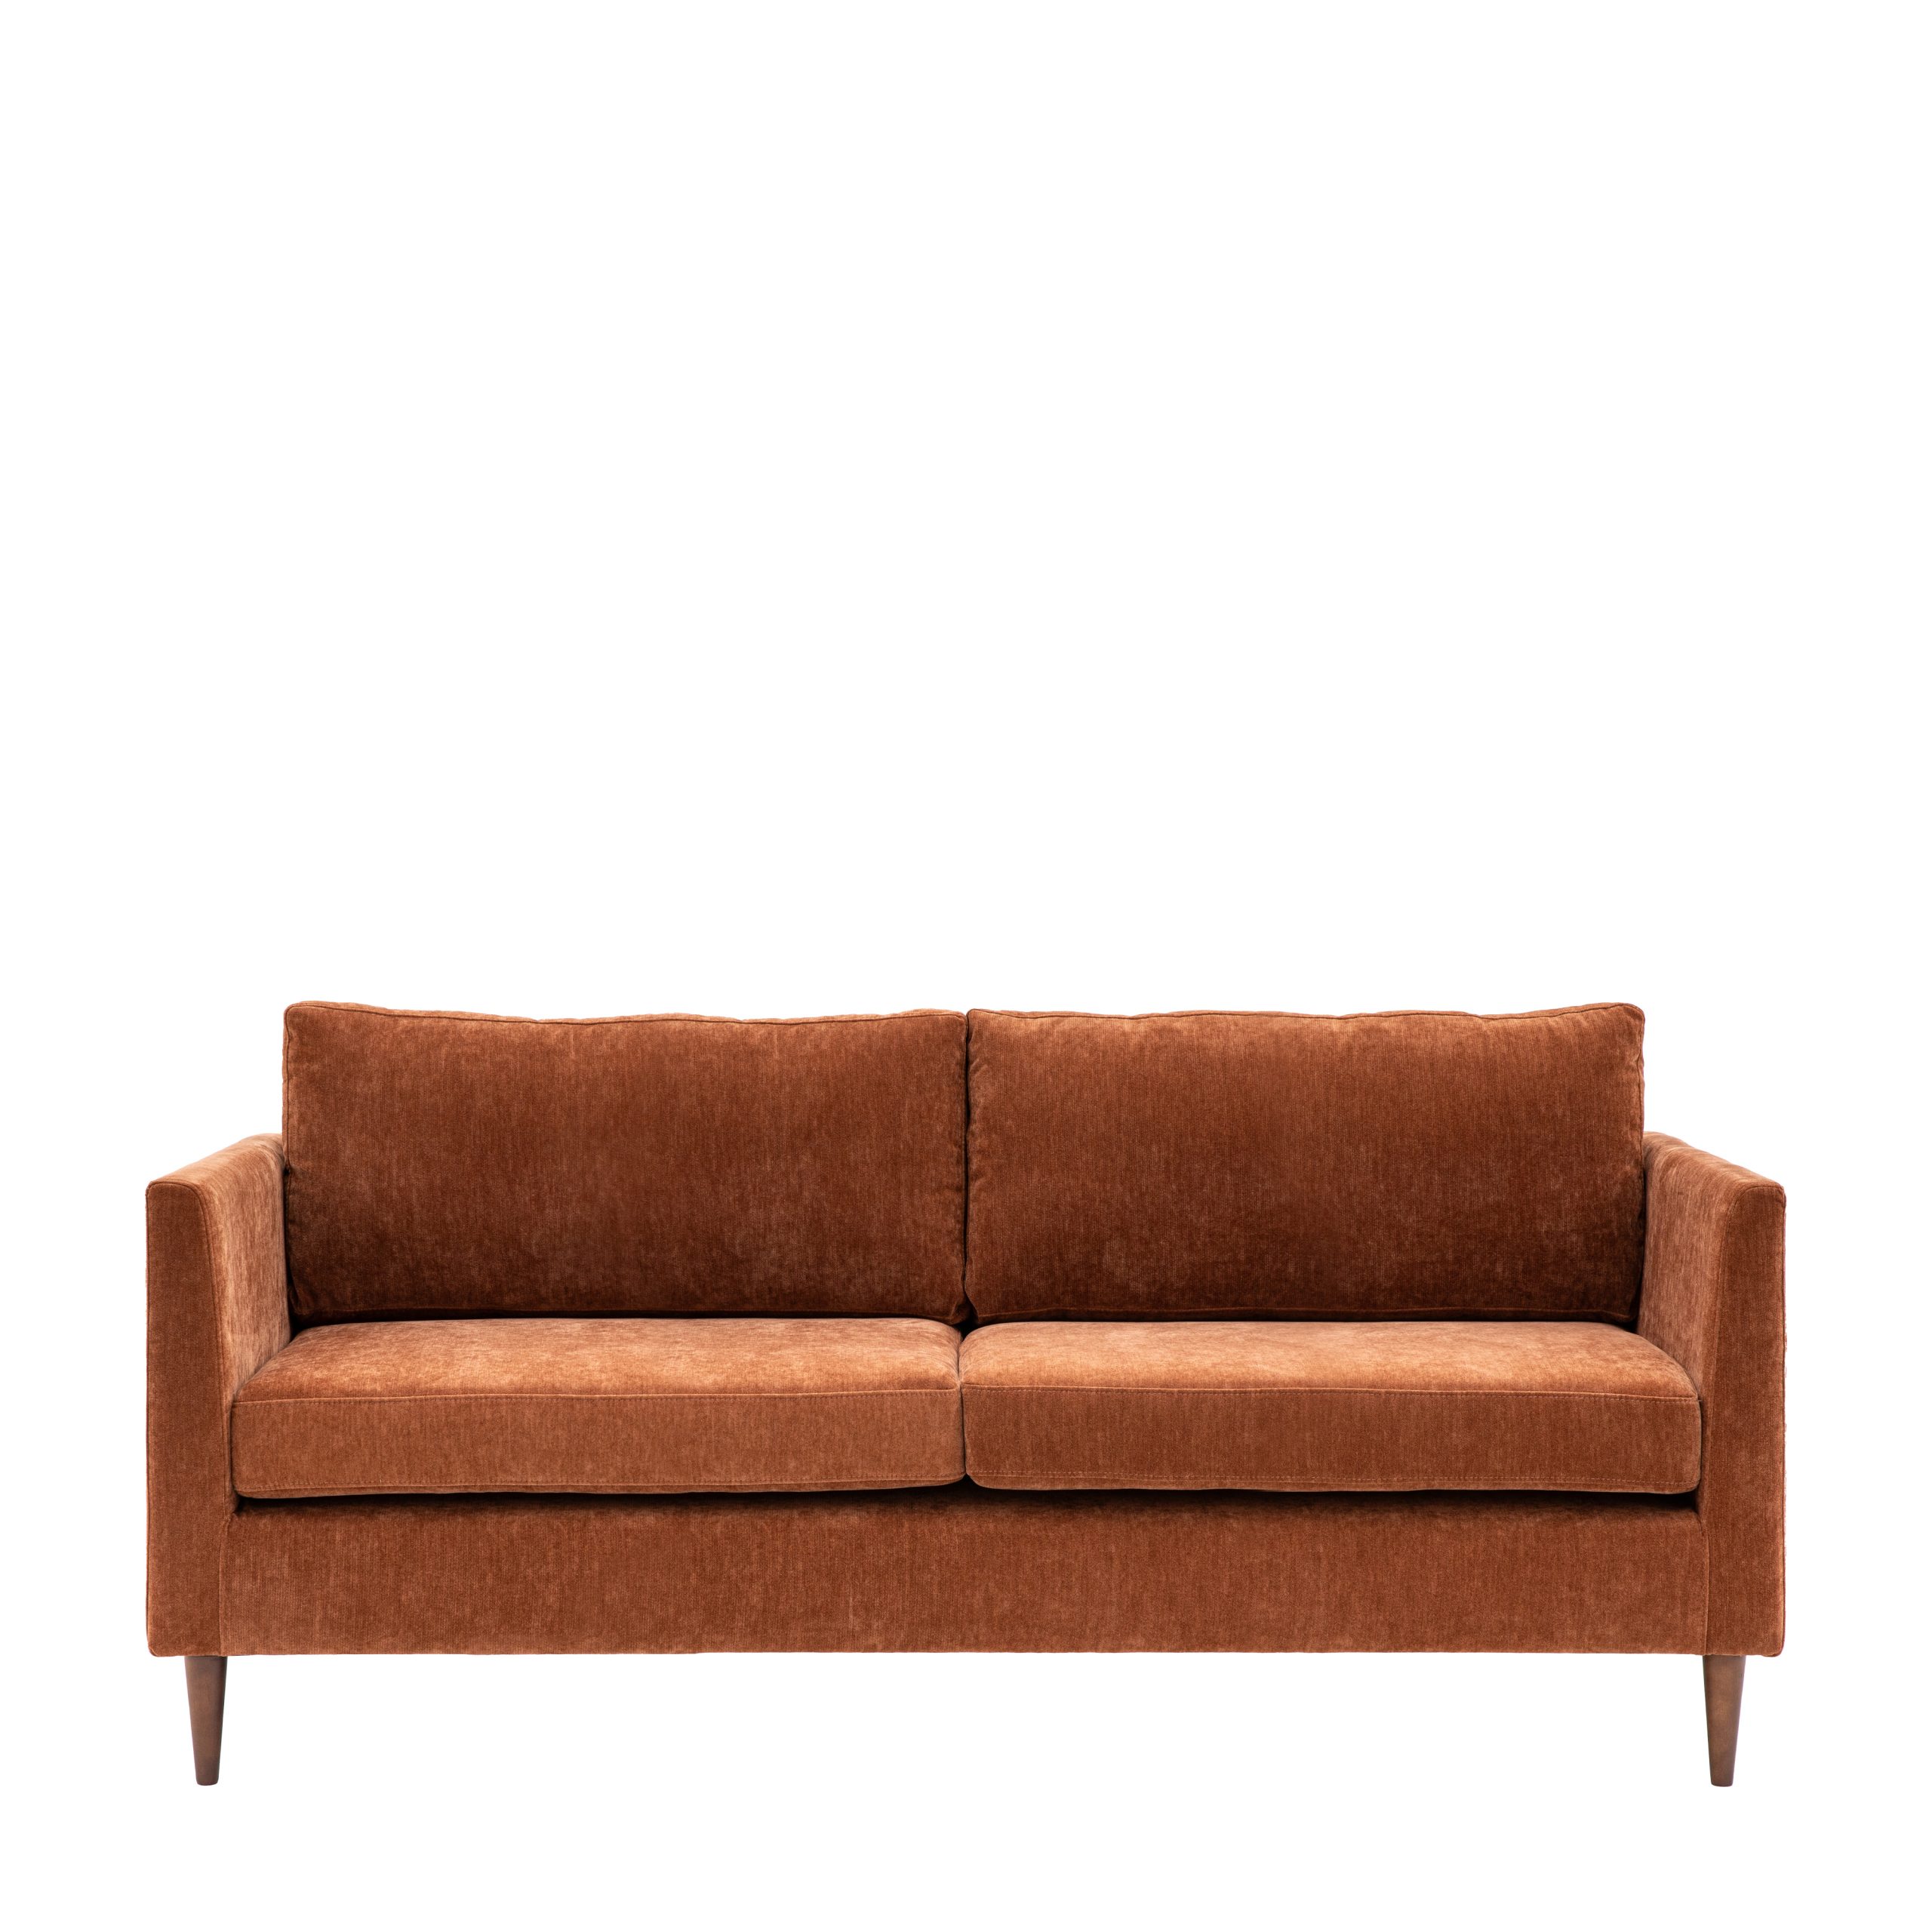 Gallery Direct Gateford Sofa 3 Seater Rust